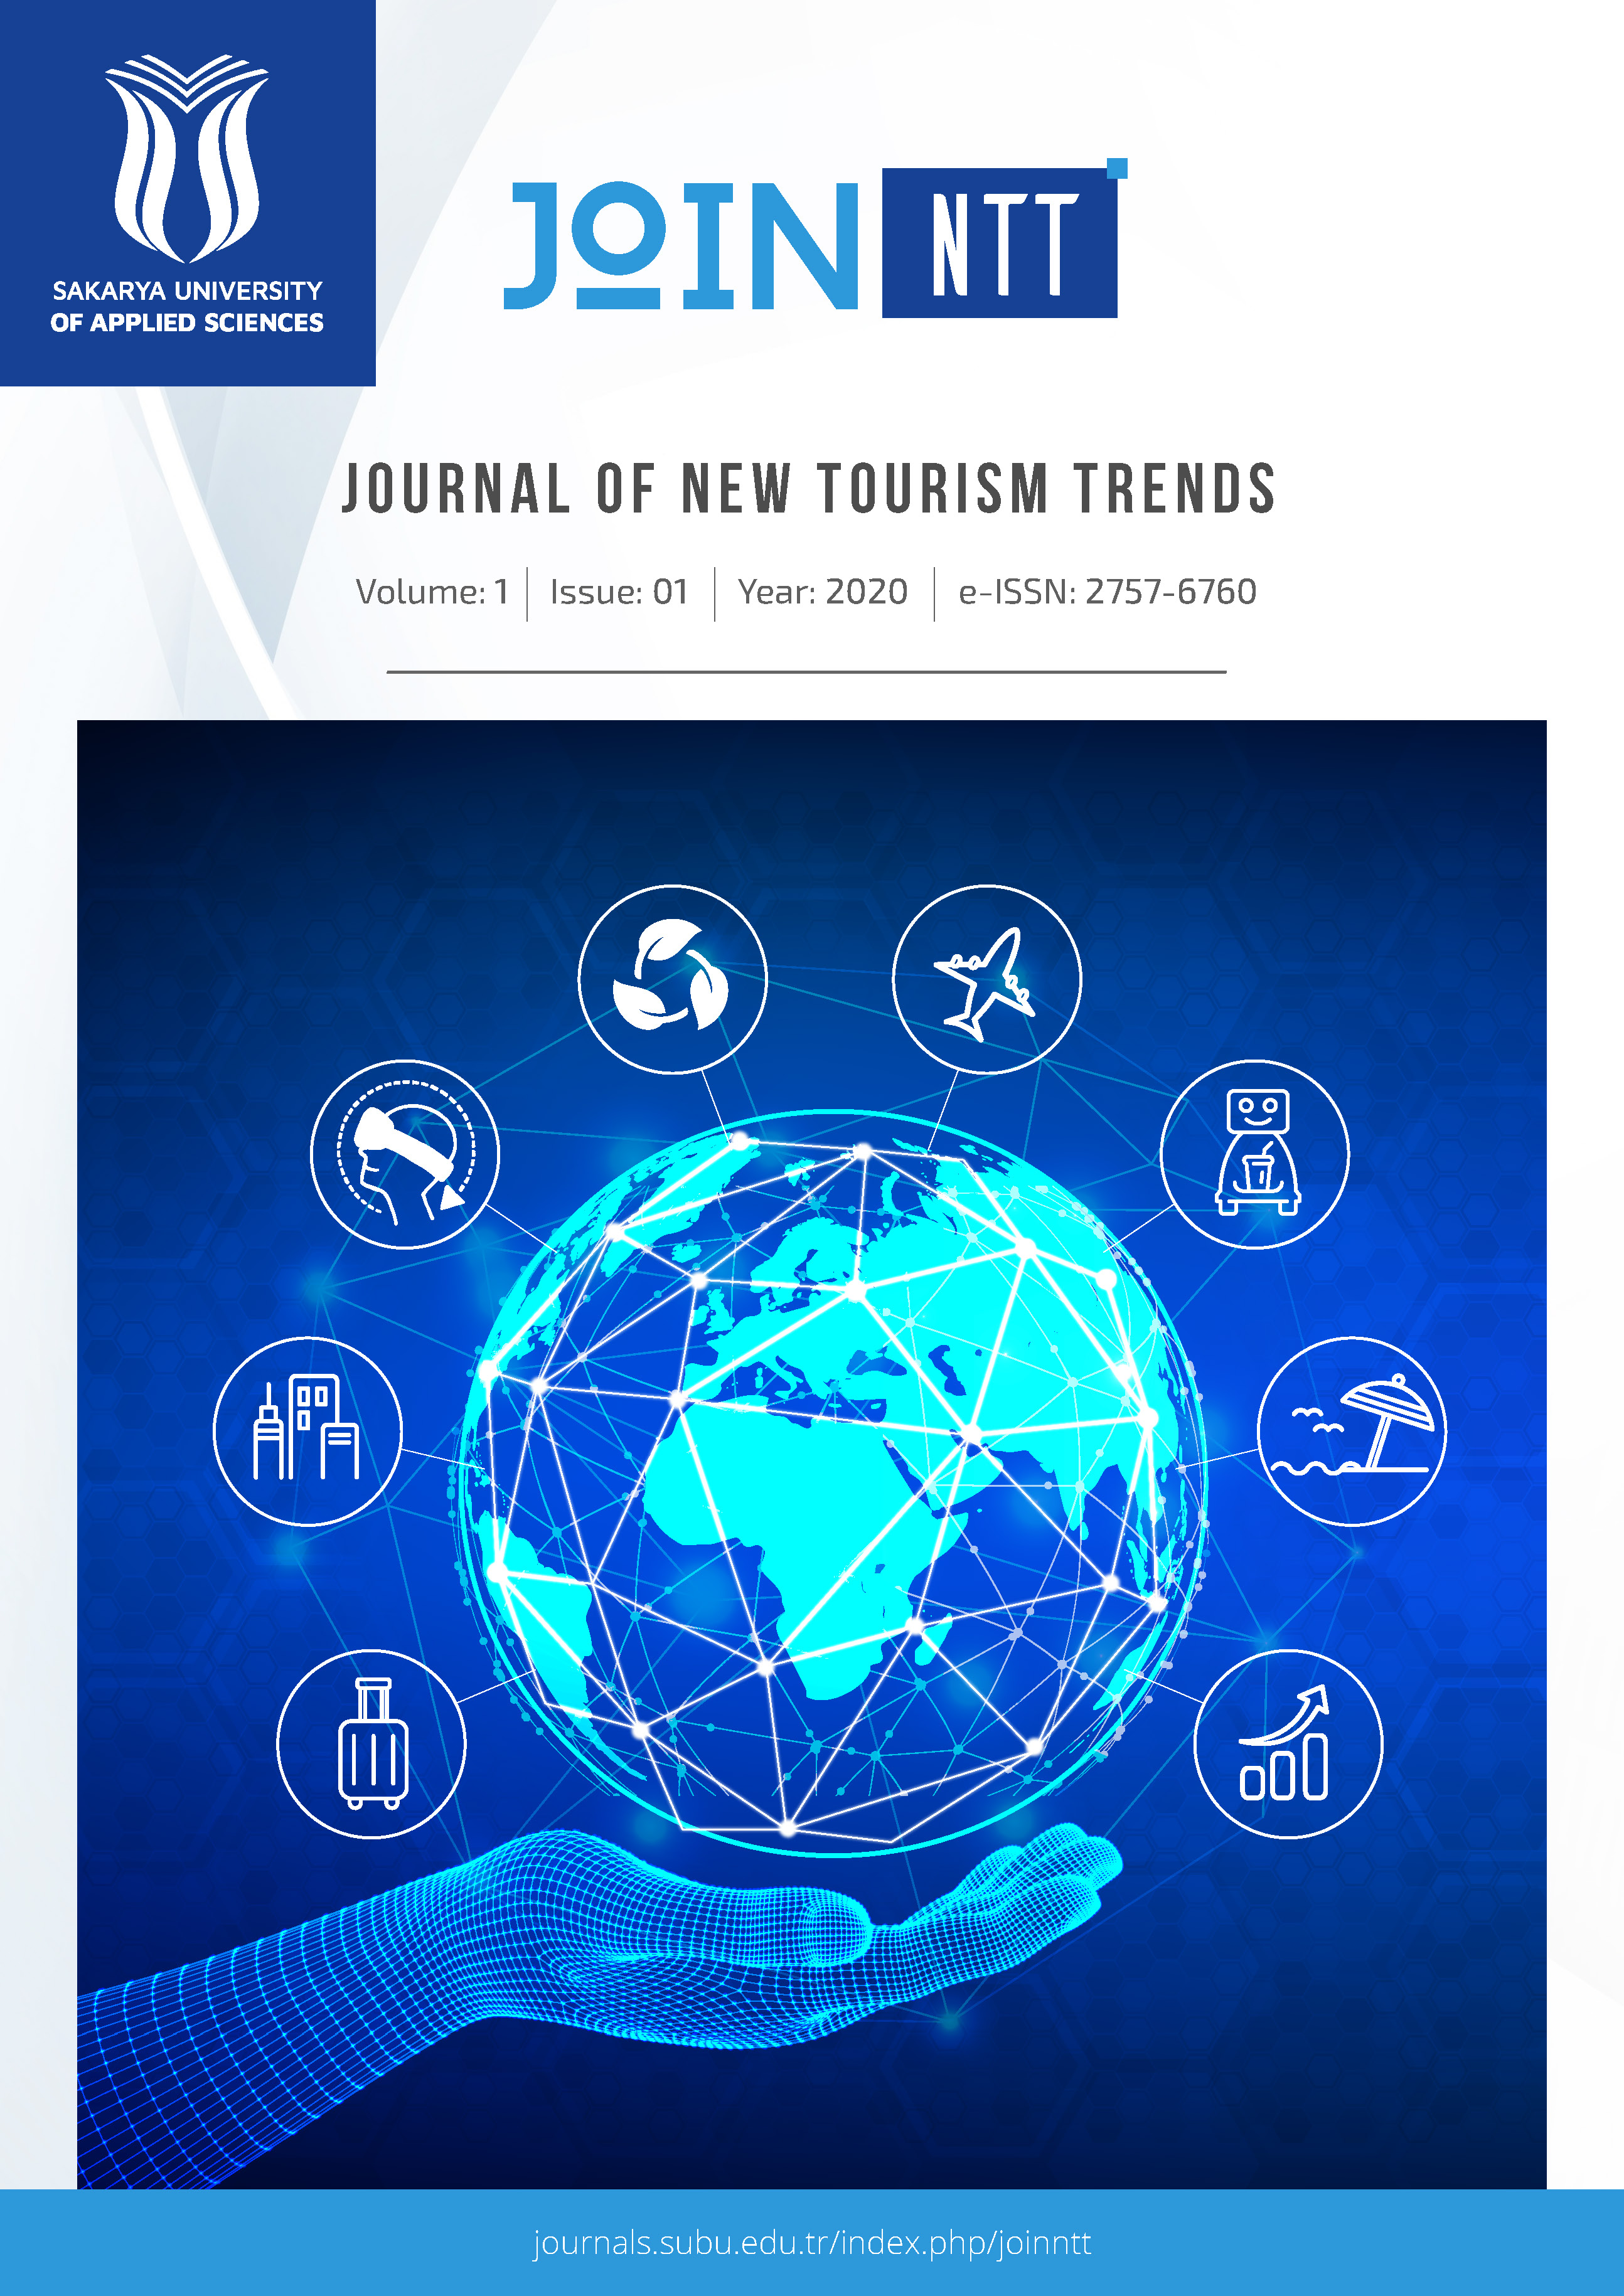 JOURNAL OF NEW TOURISM TRENDS